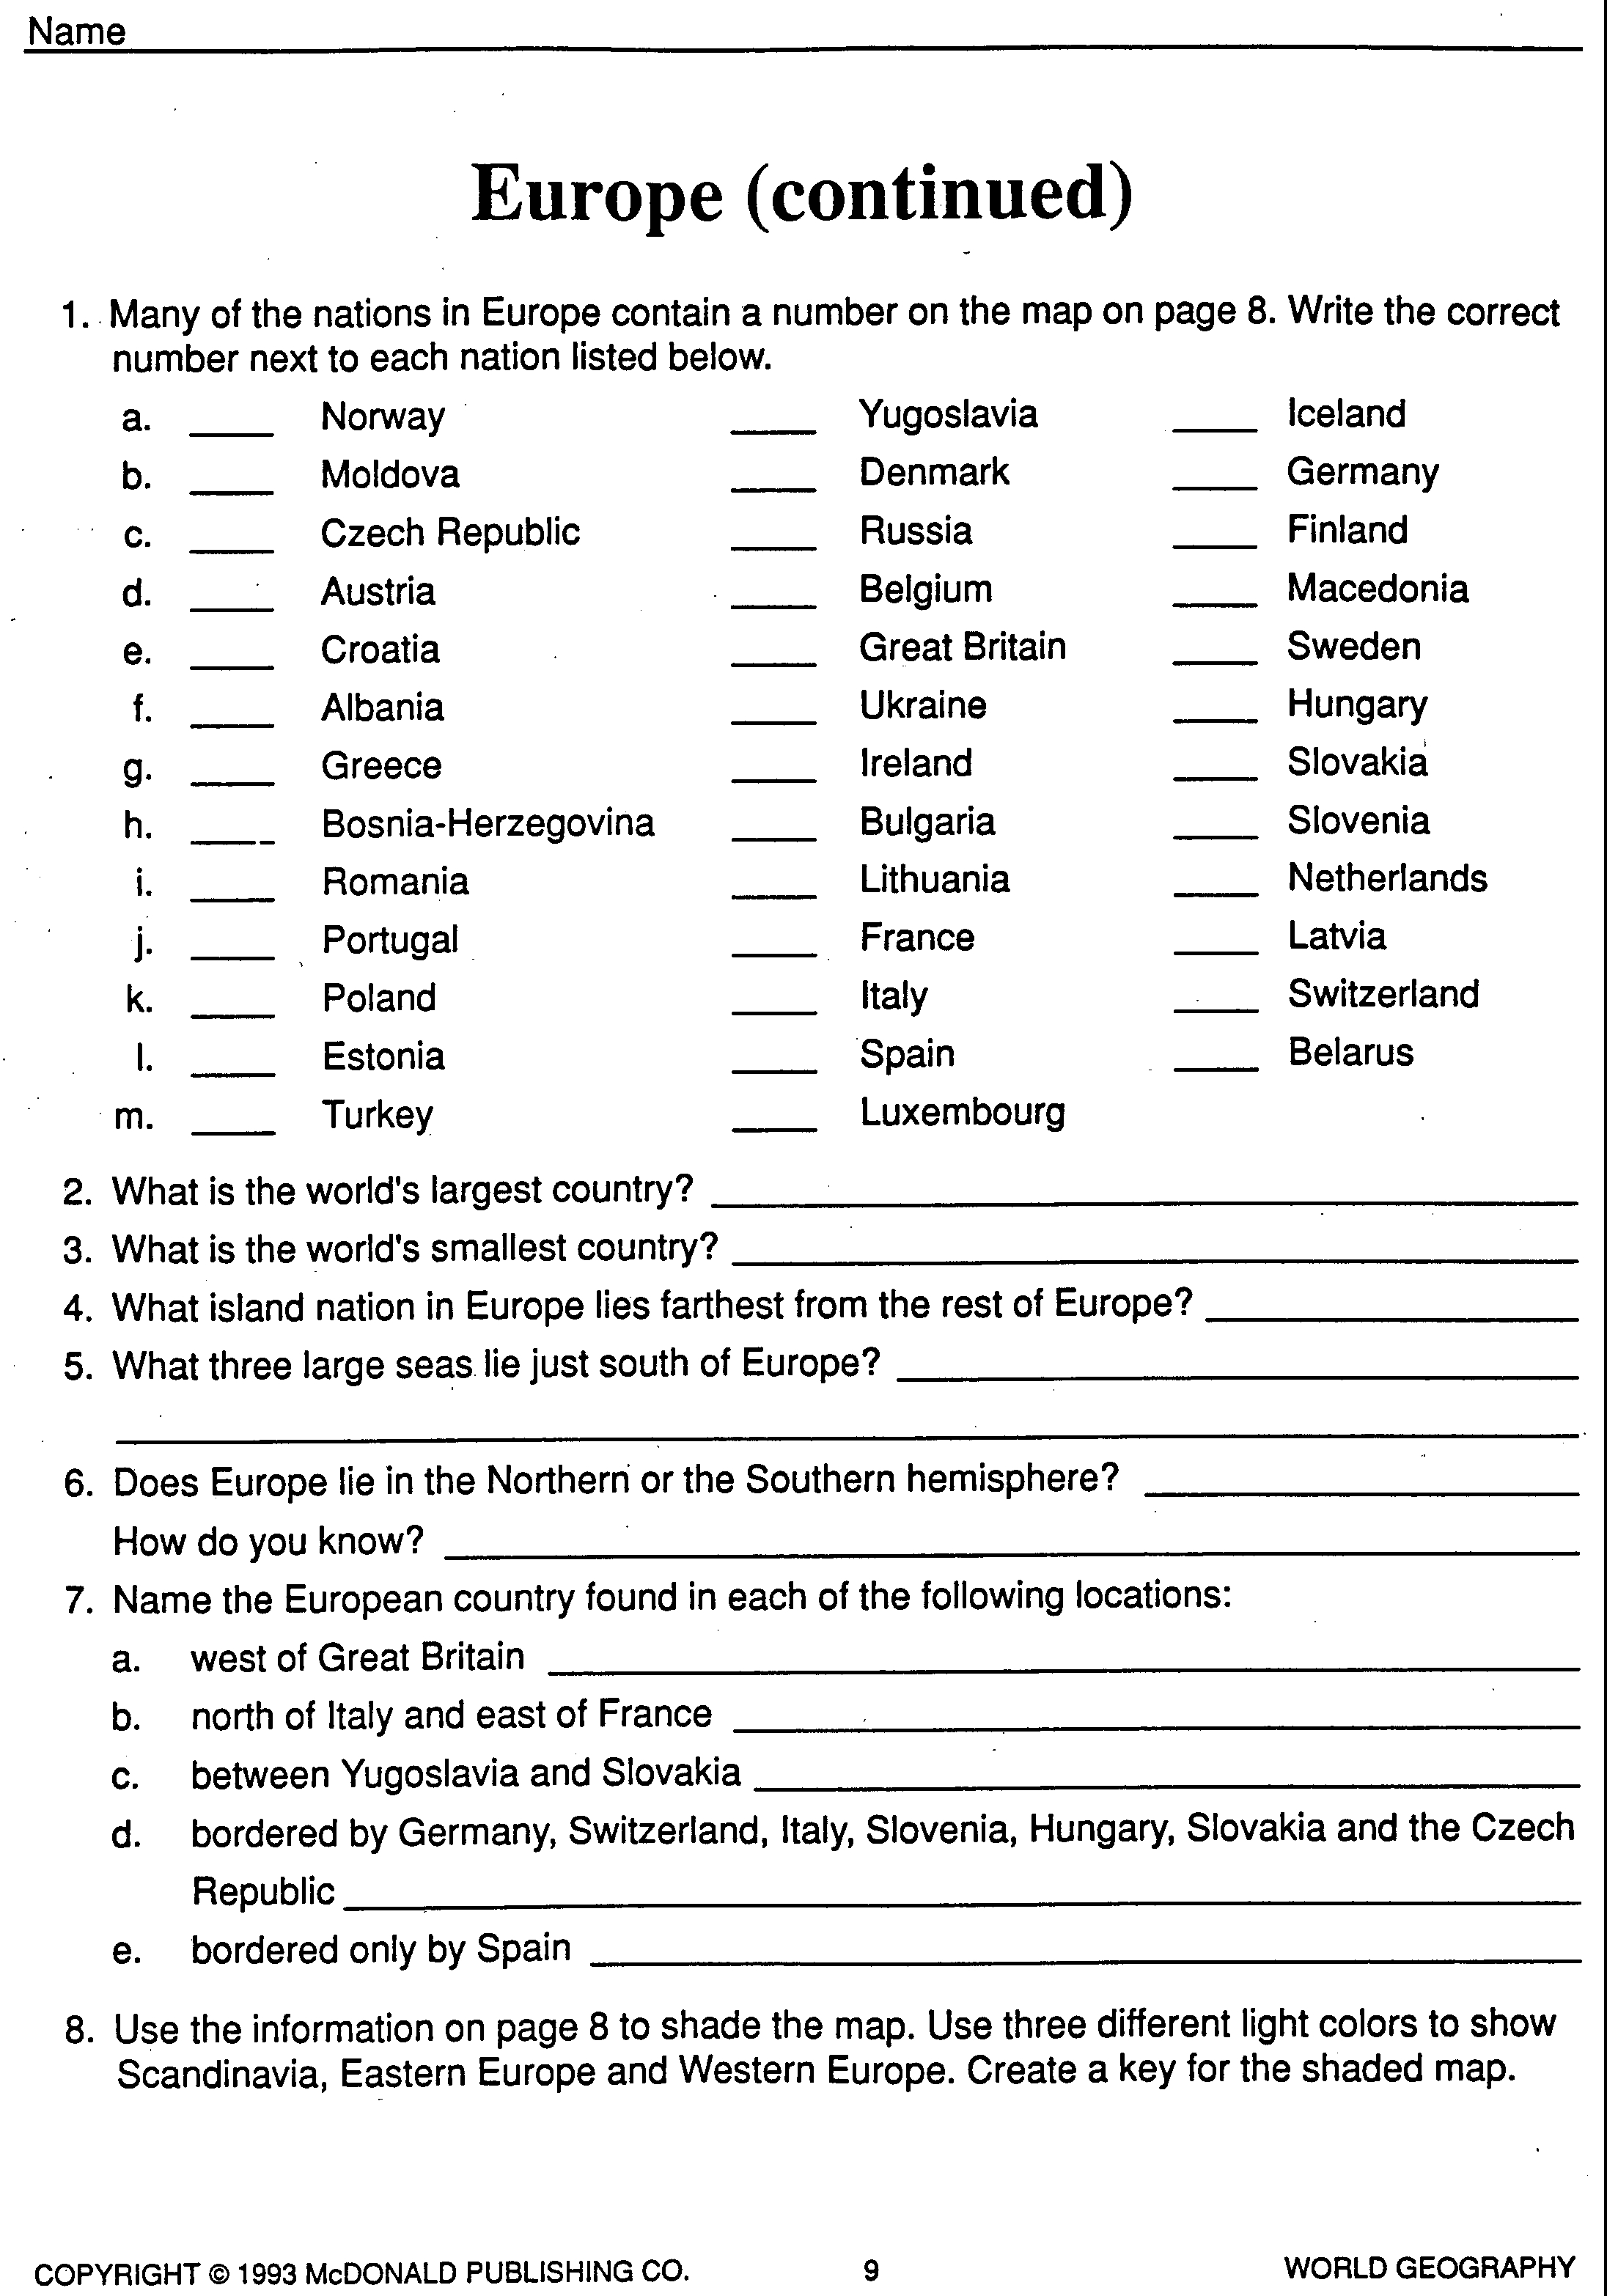 Europe Physical Features Worksheet